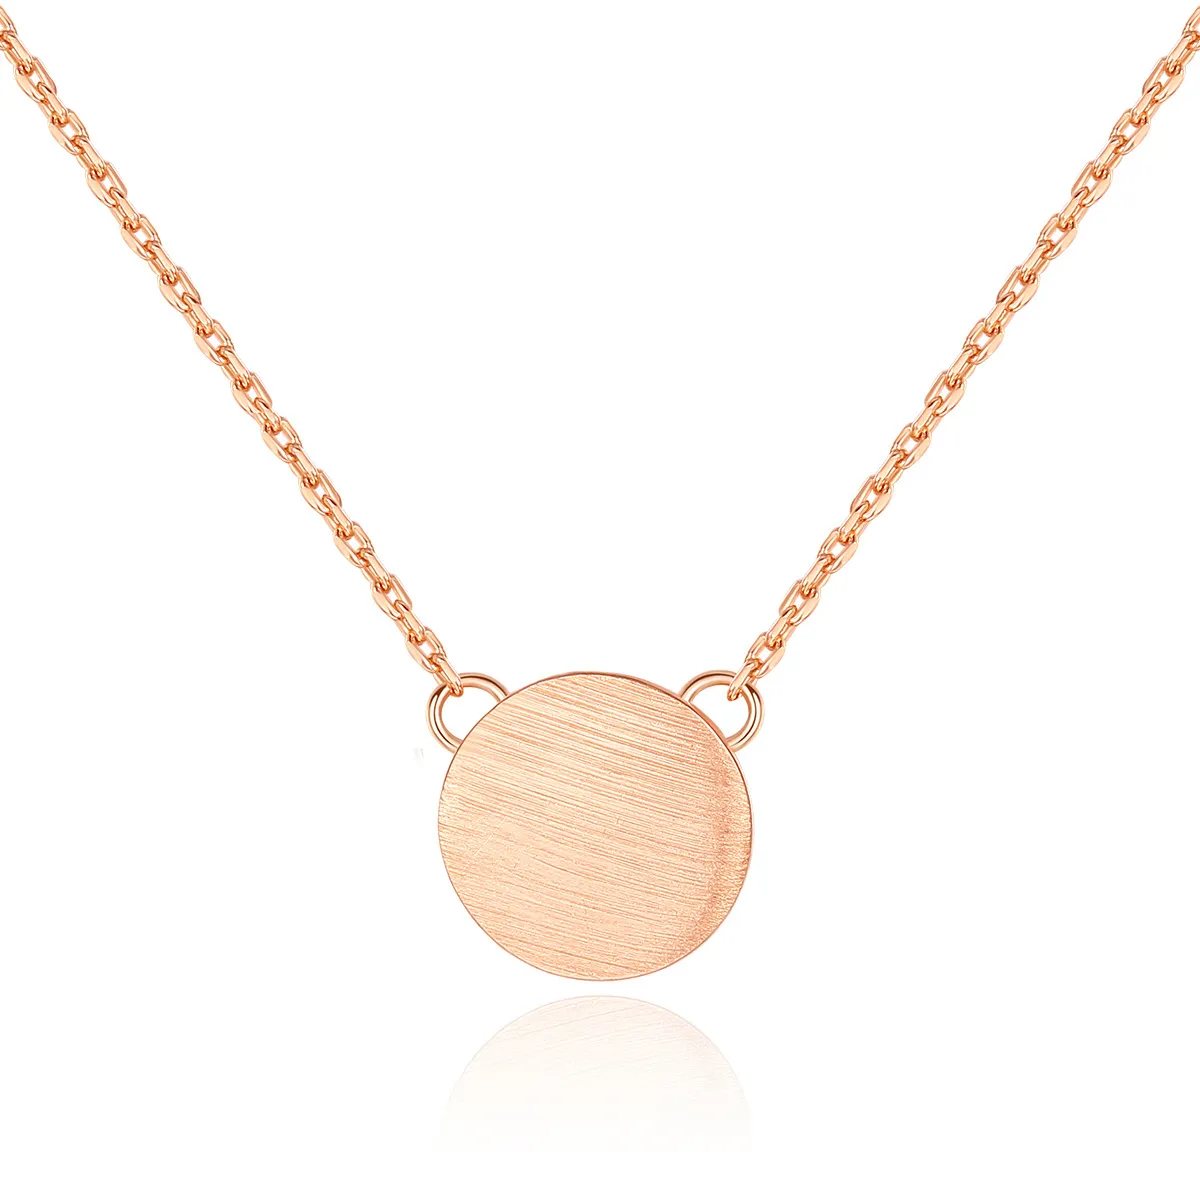 Europe Sweet Geometric Round Pendant Necklace Women Fashion Luxury Brand Rose Gold S925 Silver Necklace Girl Collar Chain High-End Jewelry Valentine's Day Gift